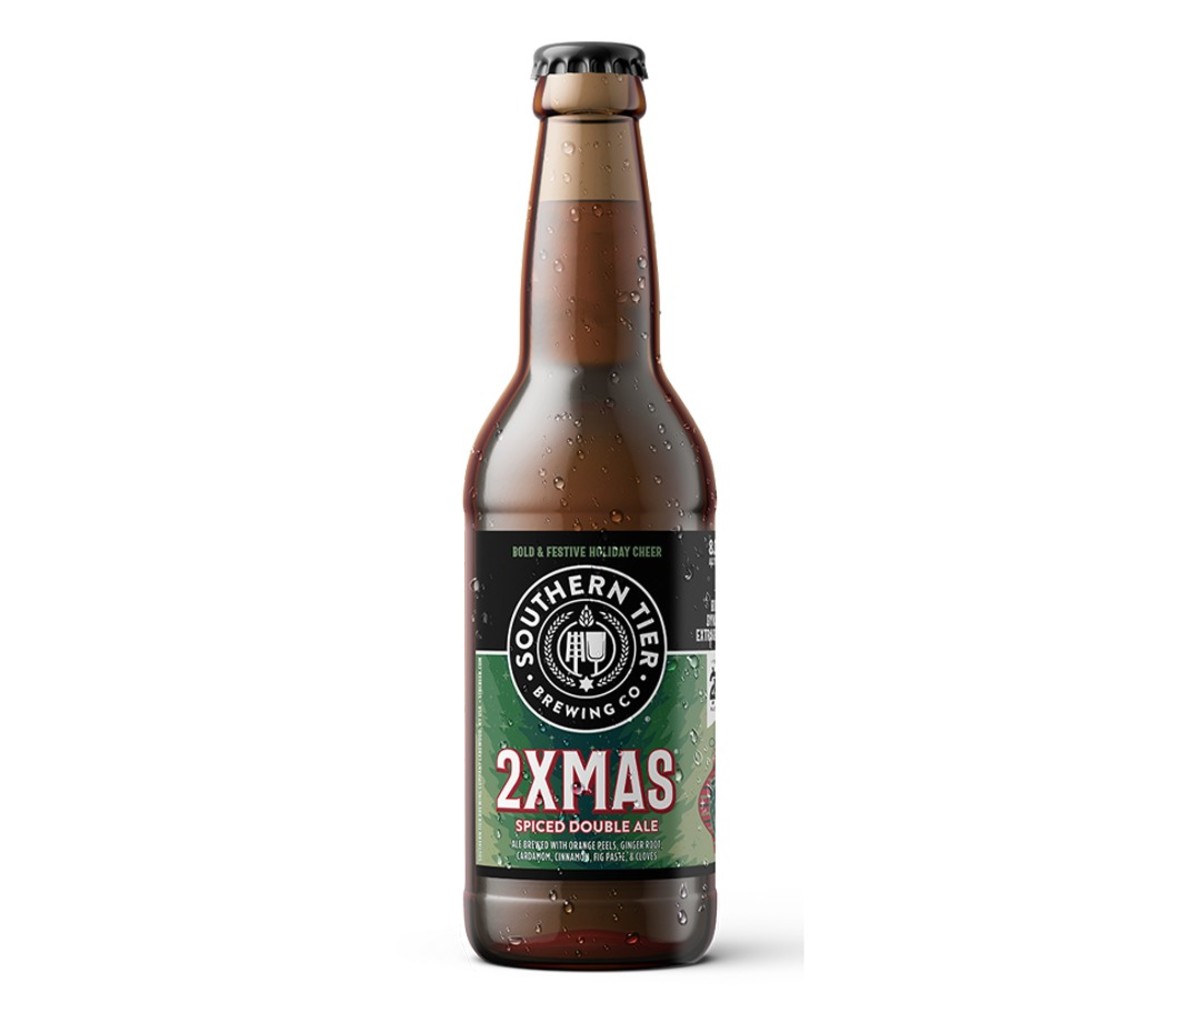 A bottle of Southern Tier 2XMAS